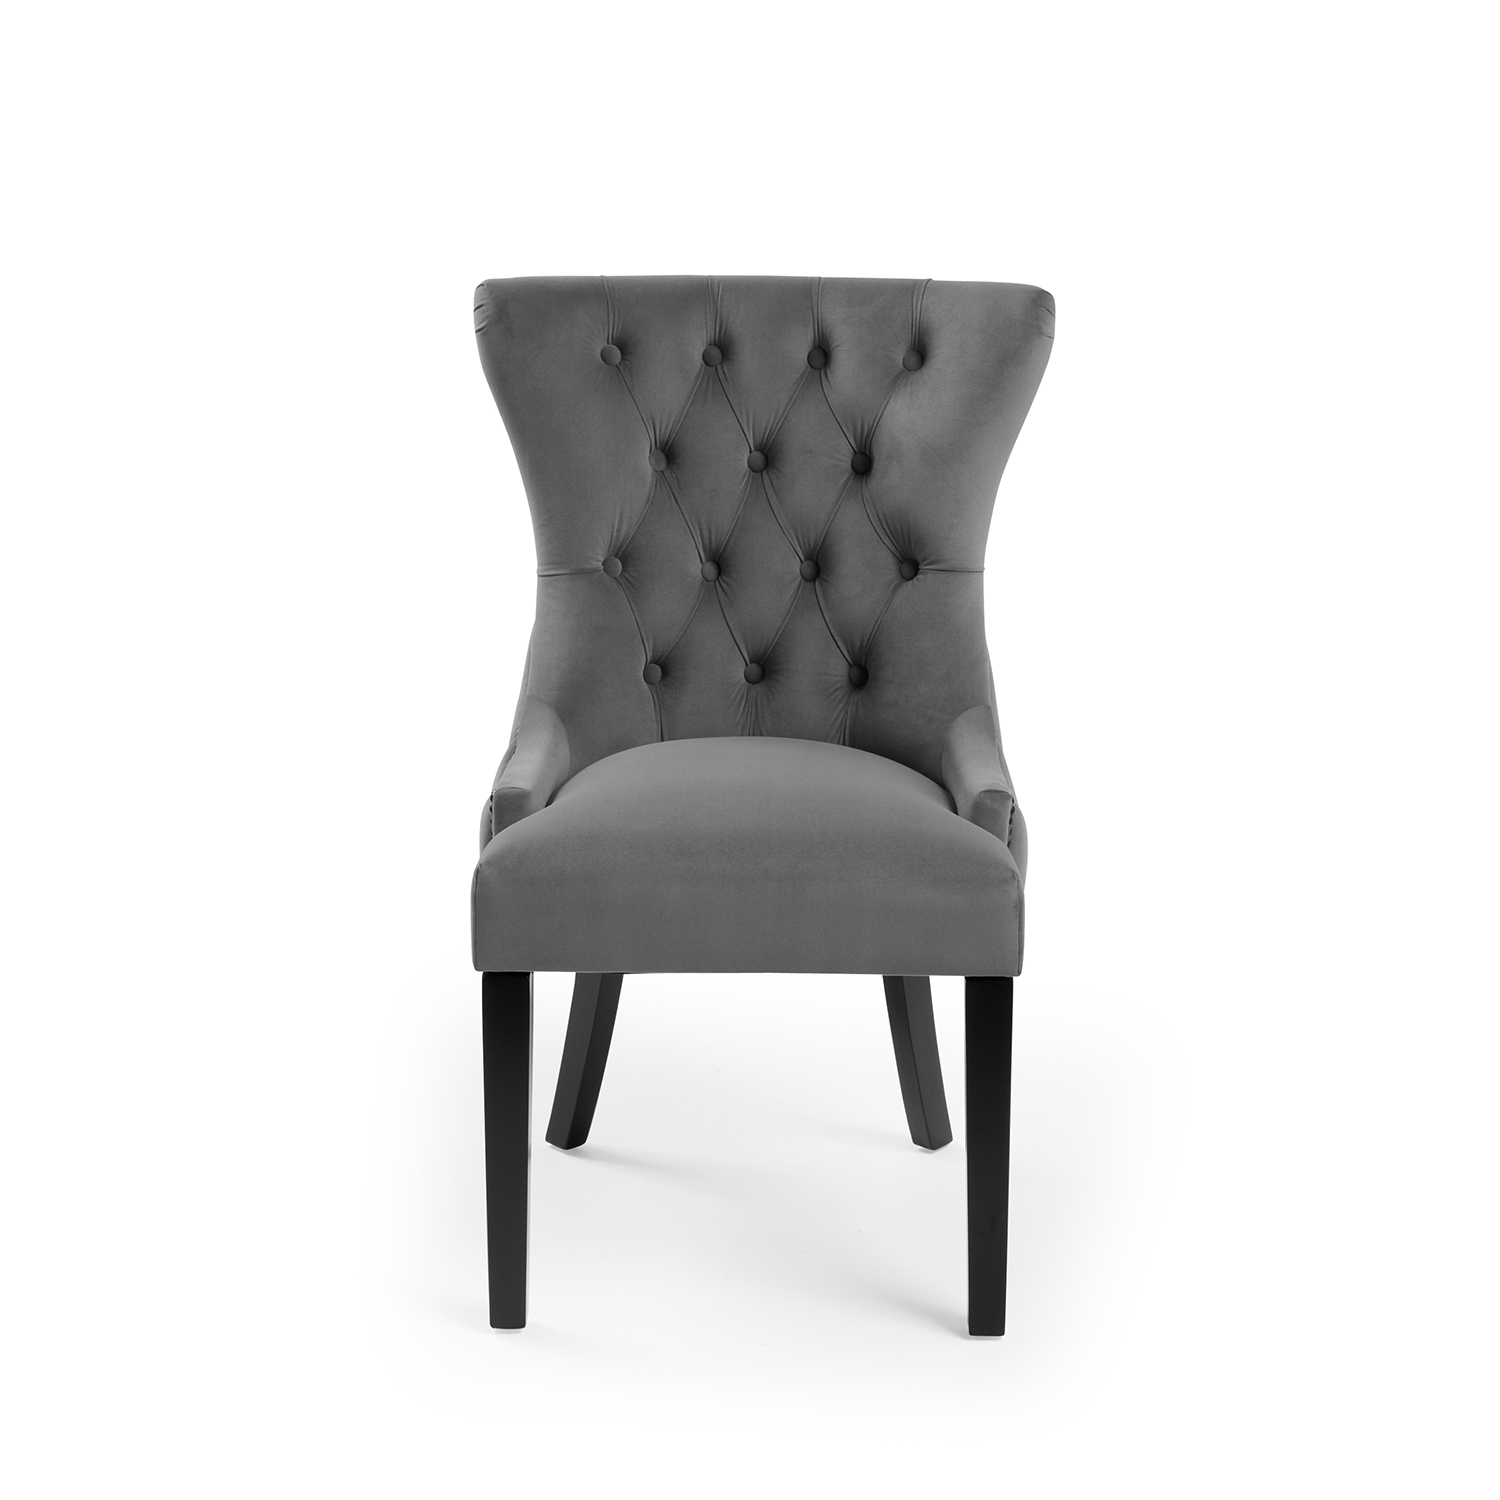 New Knightsbridge Grey Velvet Upholstered Chair With Button Tufted Detailing – Black Studs